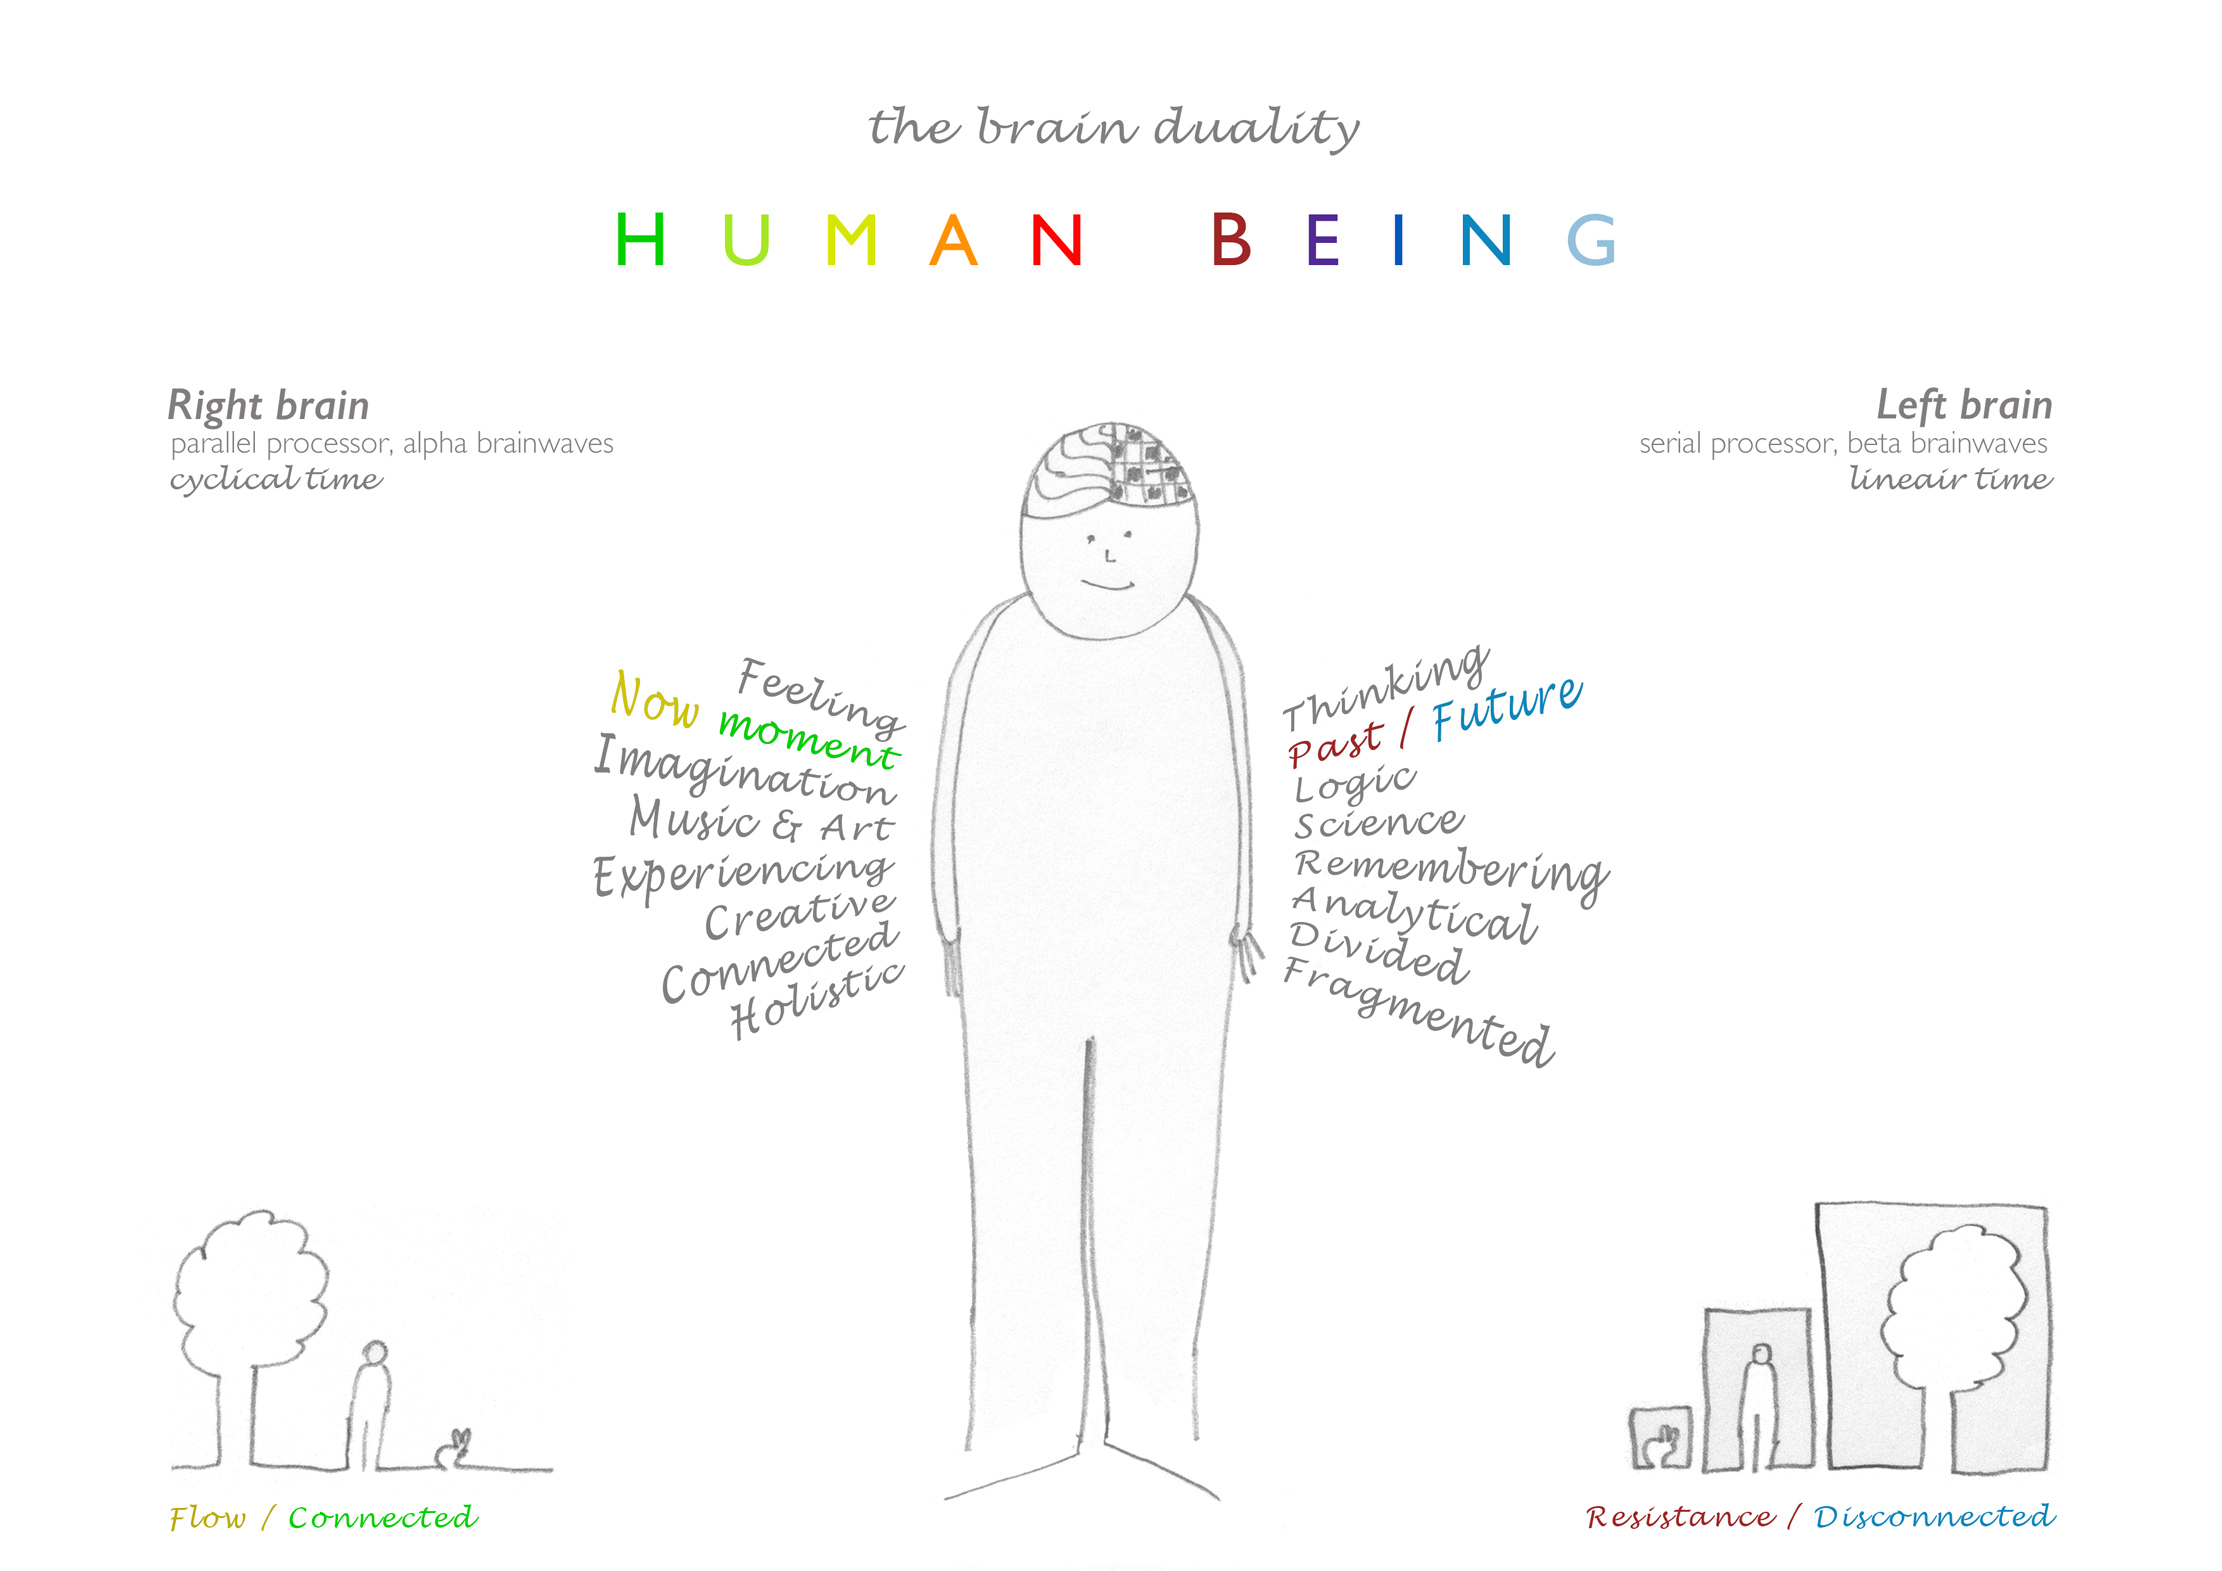 Human Being | the brain duality